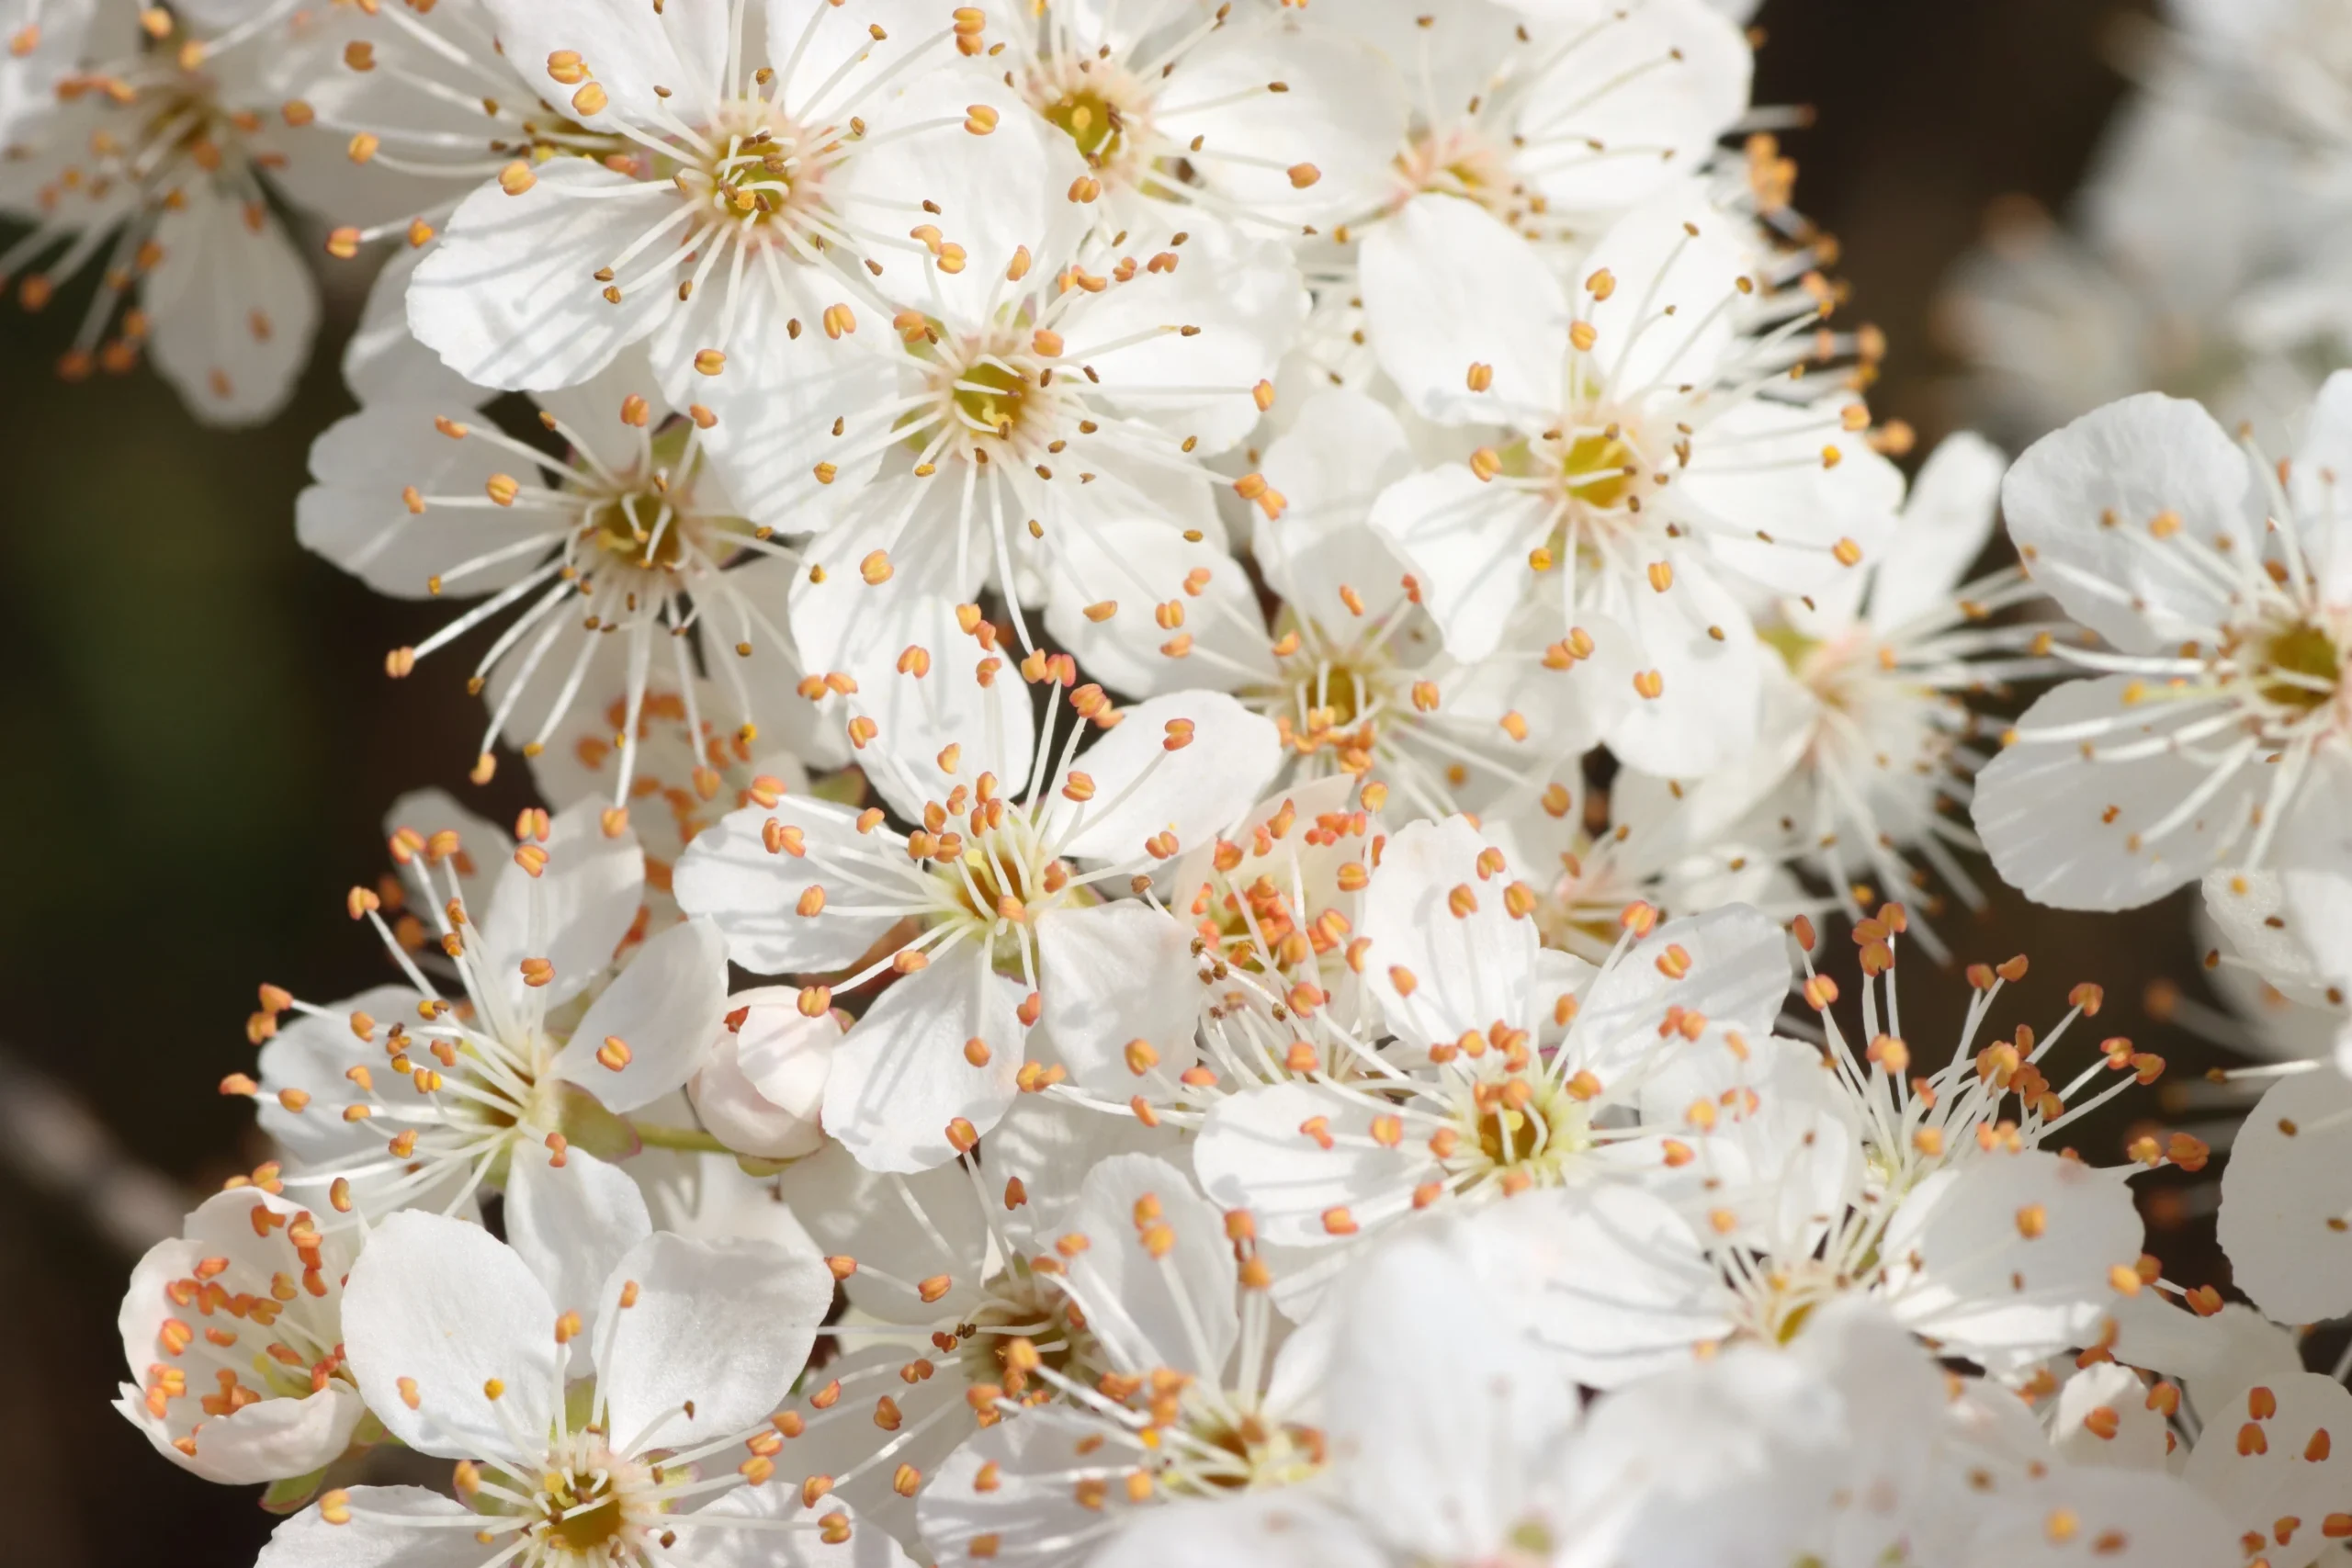 Cherry plum - white flowers in the centre of the picture with orange stamens protruding from the flowers.